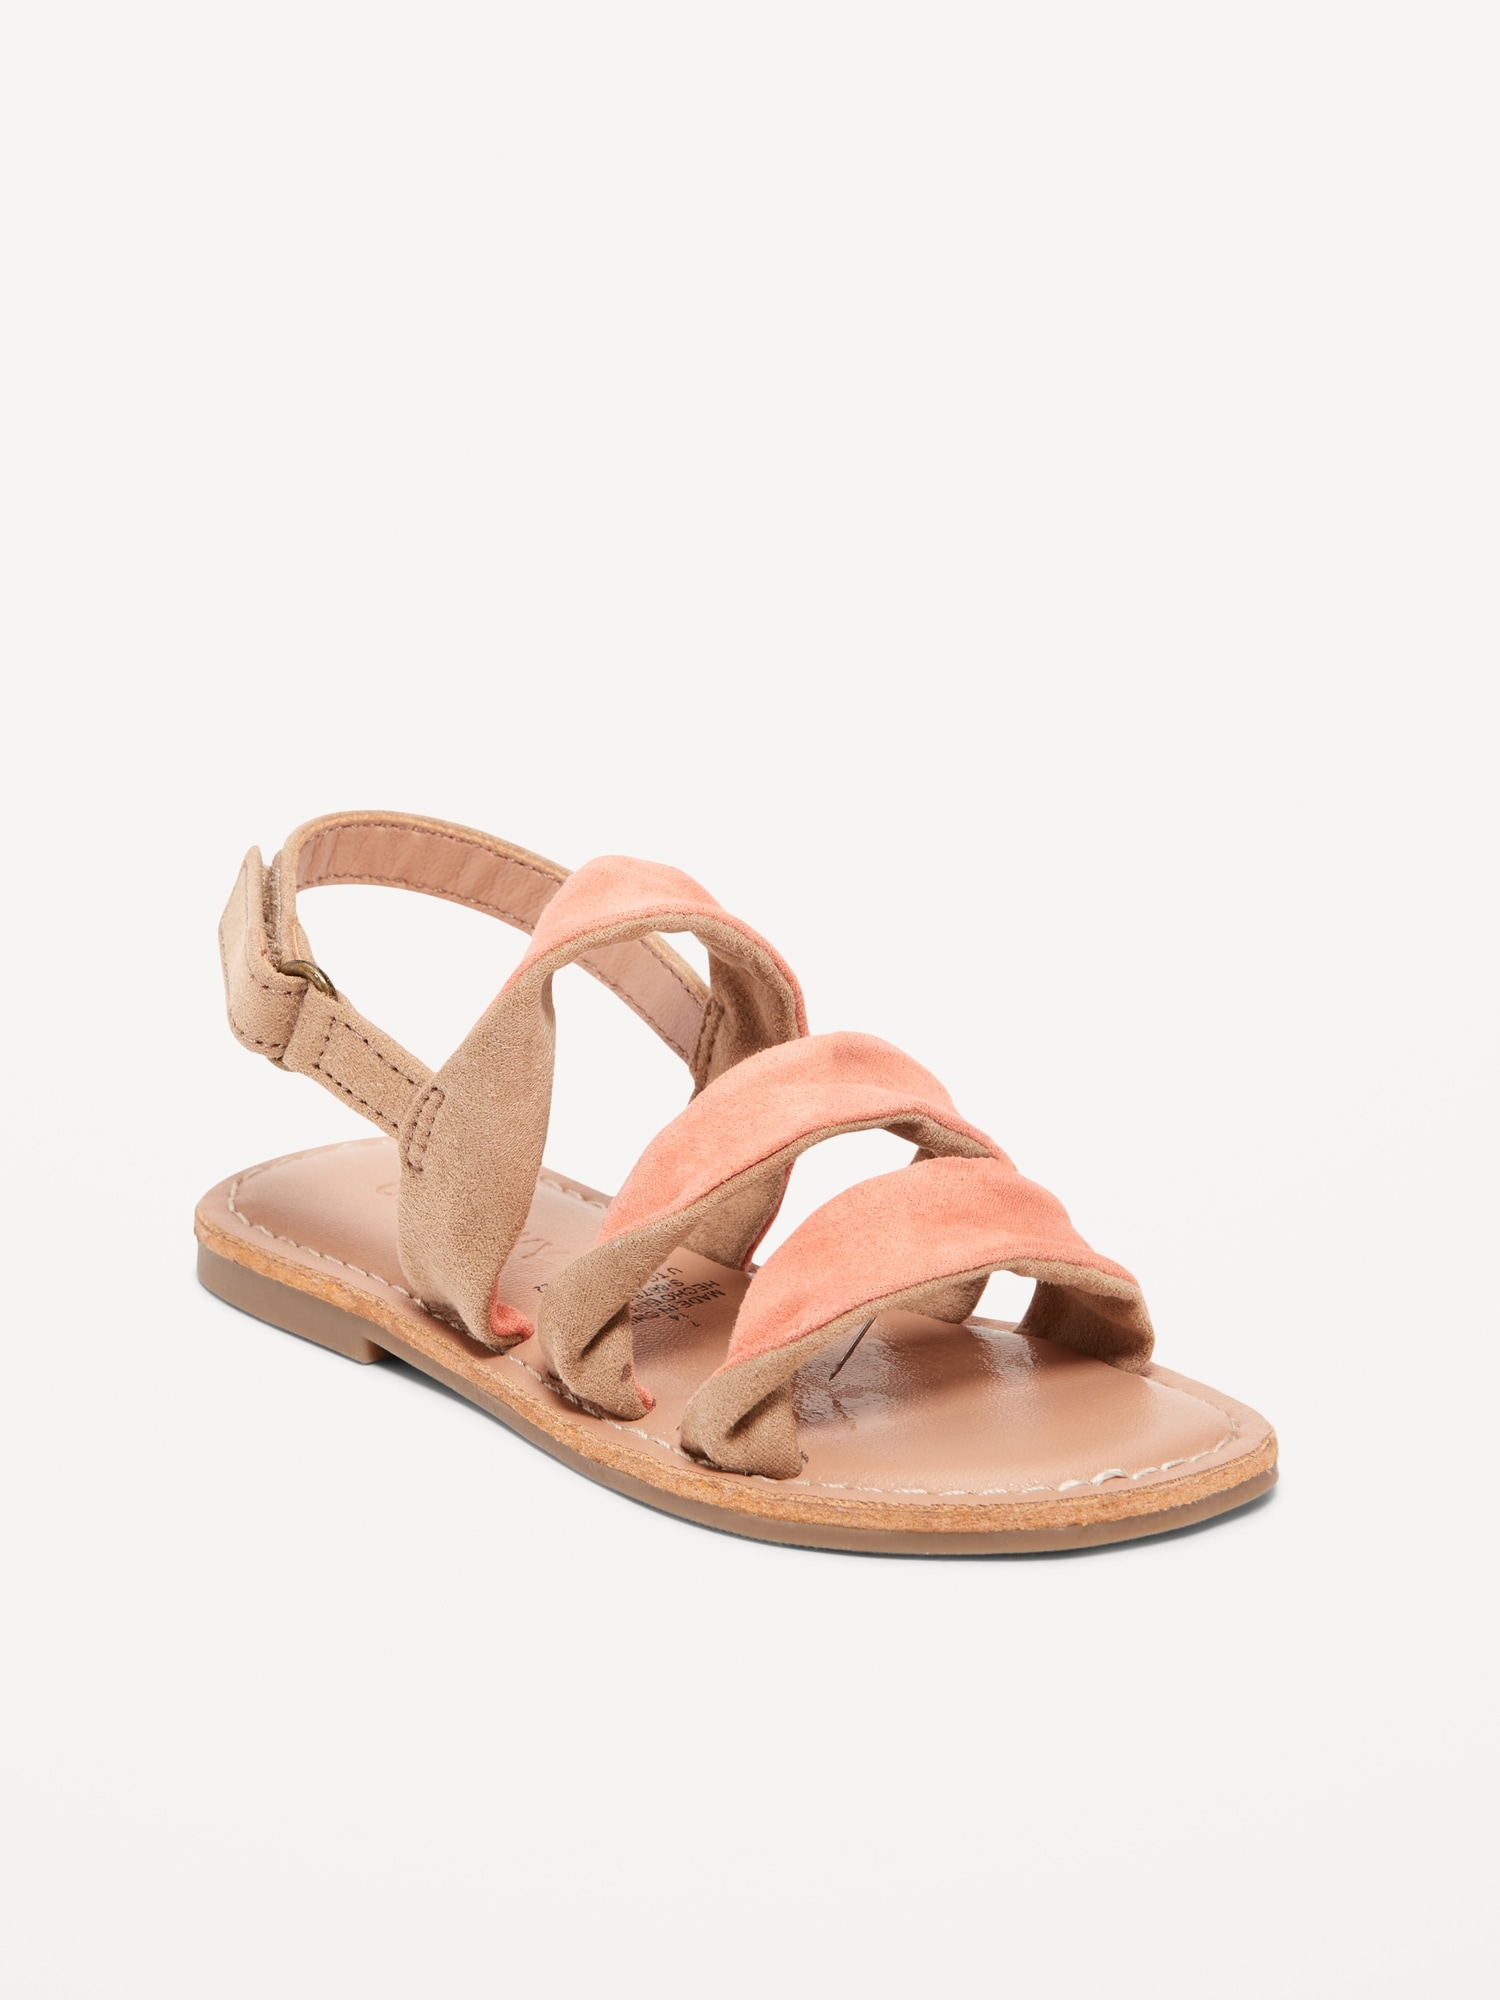 Faux-Suede Twisted Strappy Sandals for Toddler Girls